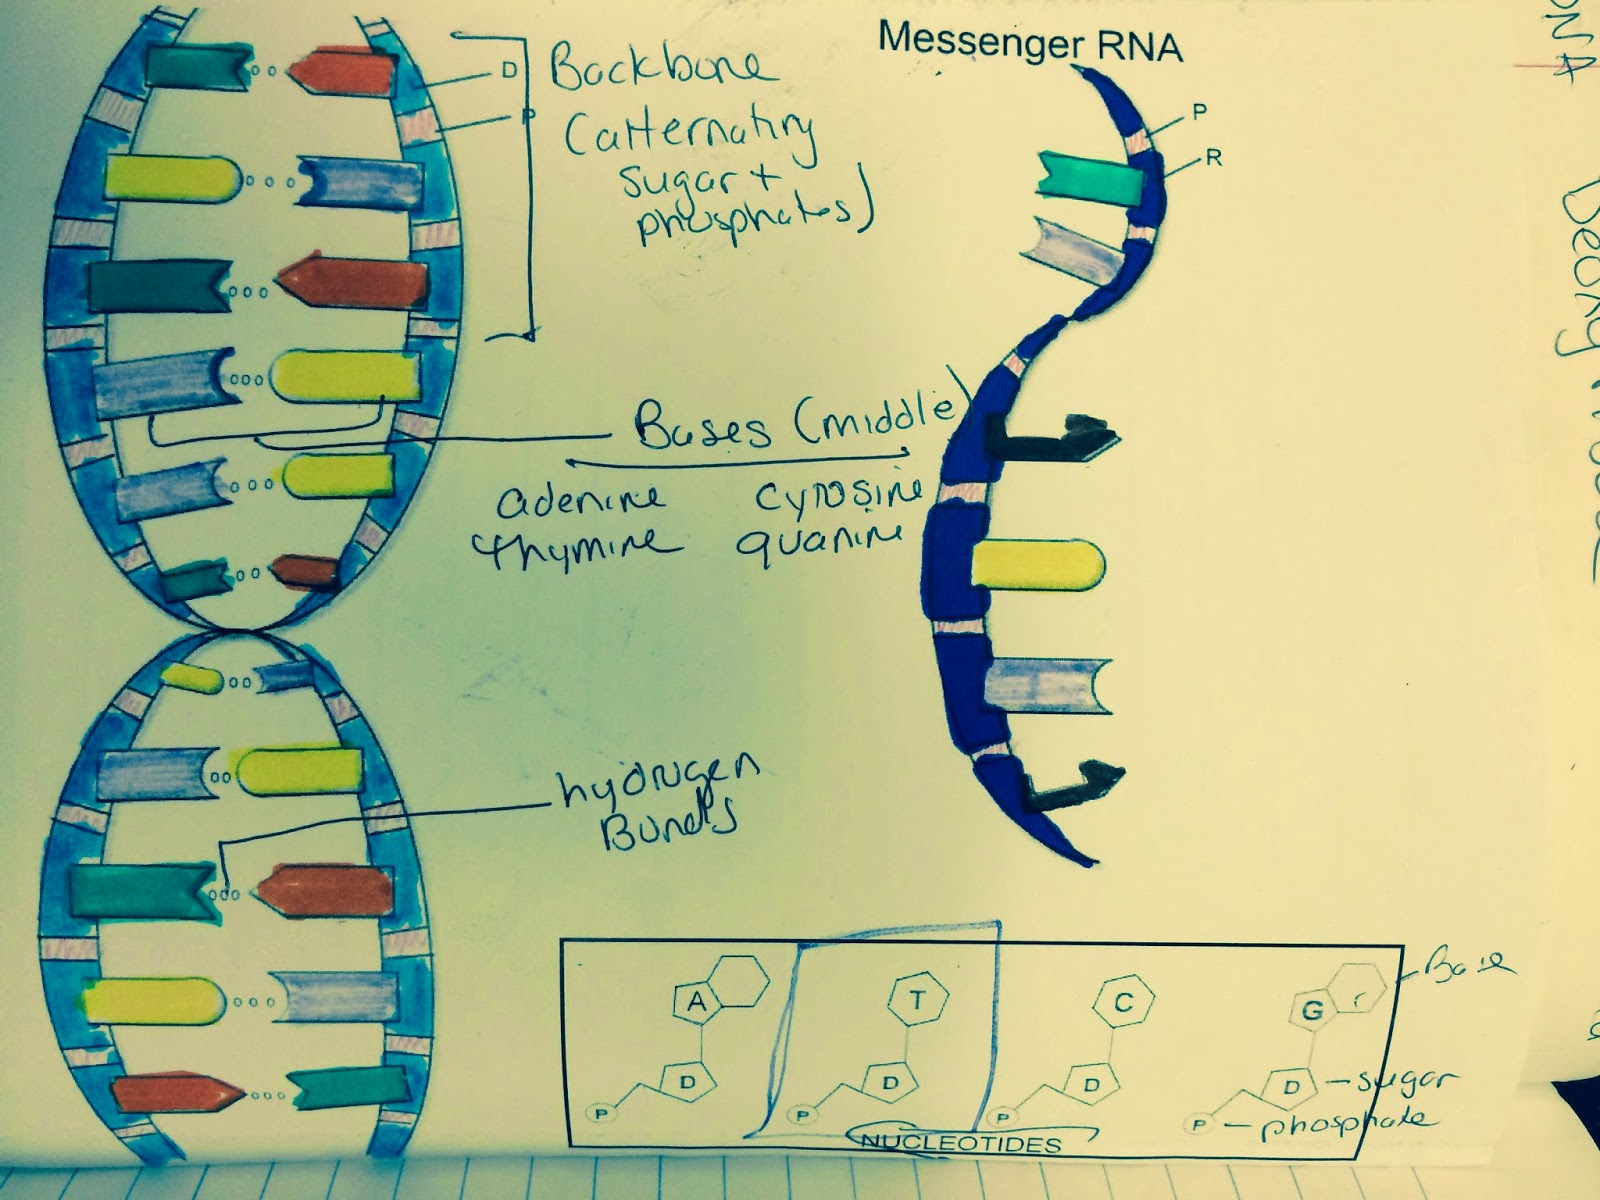 Mrs. Greeley Howard’s Biology Class: DNA coloring notes and questions